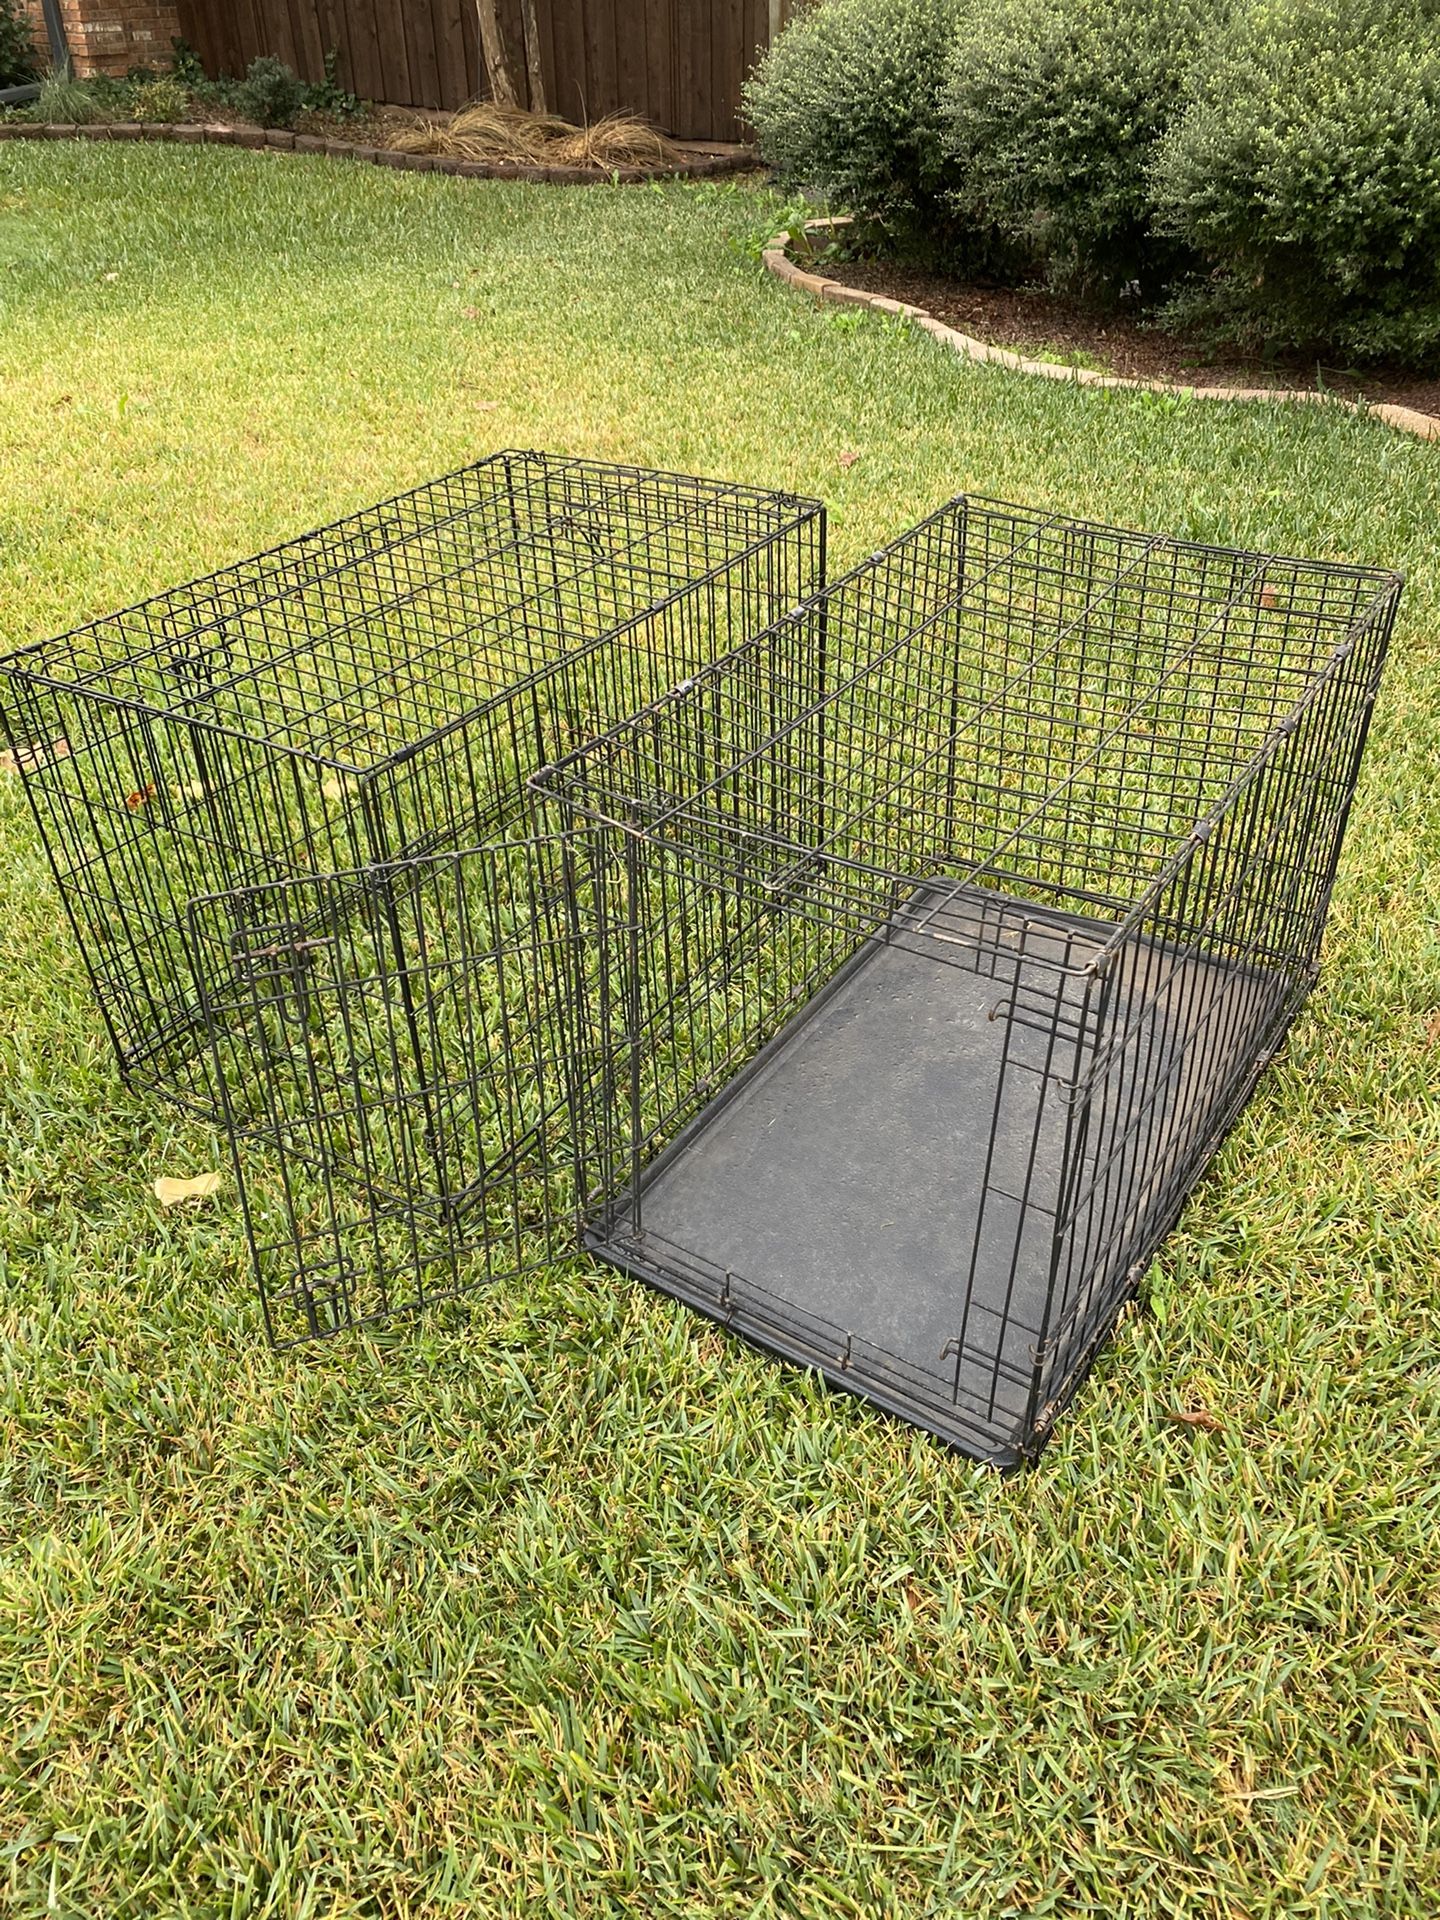 Dog Crates 35x22x24 $40 With Tray And $30 Without Tray